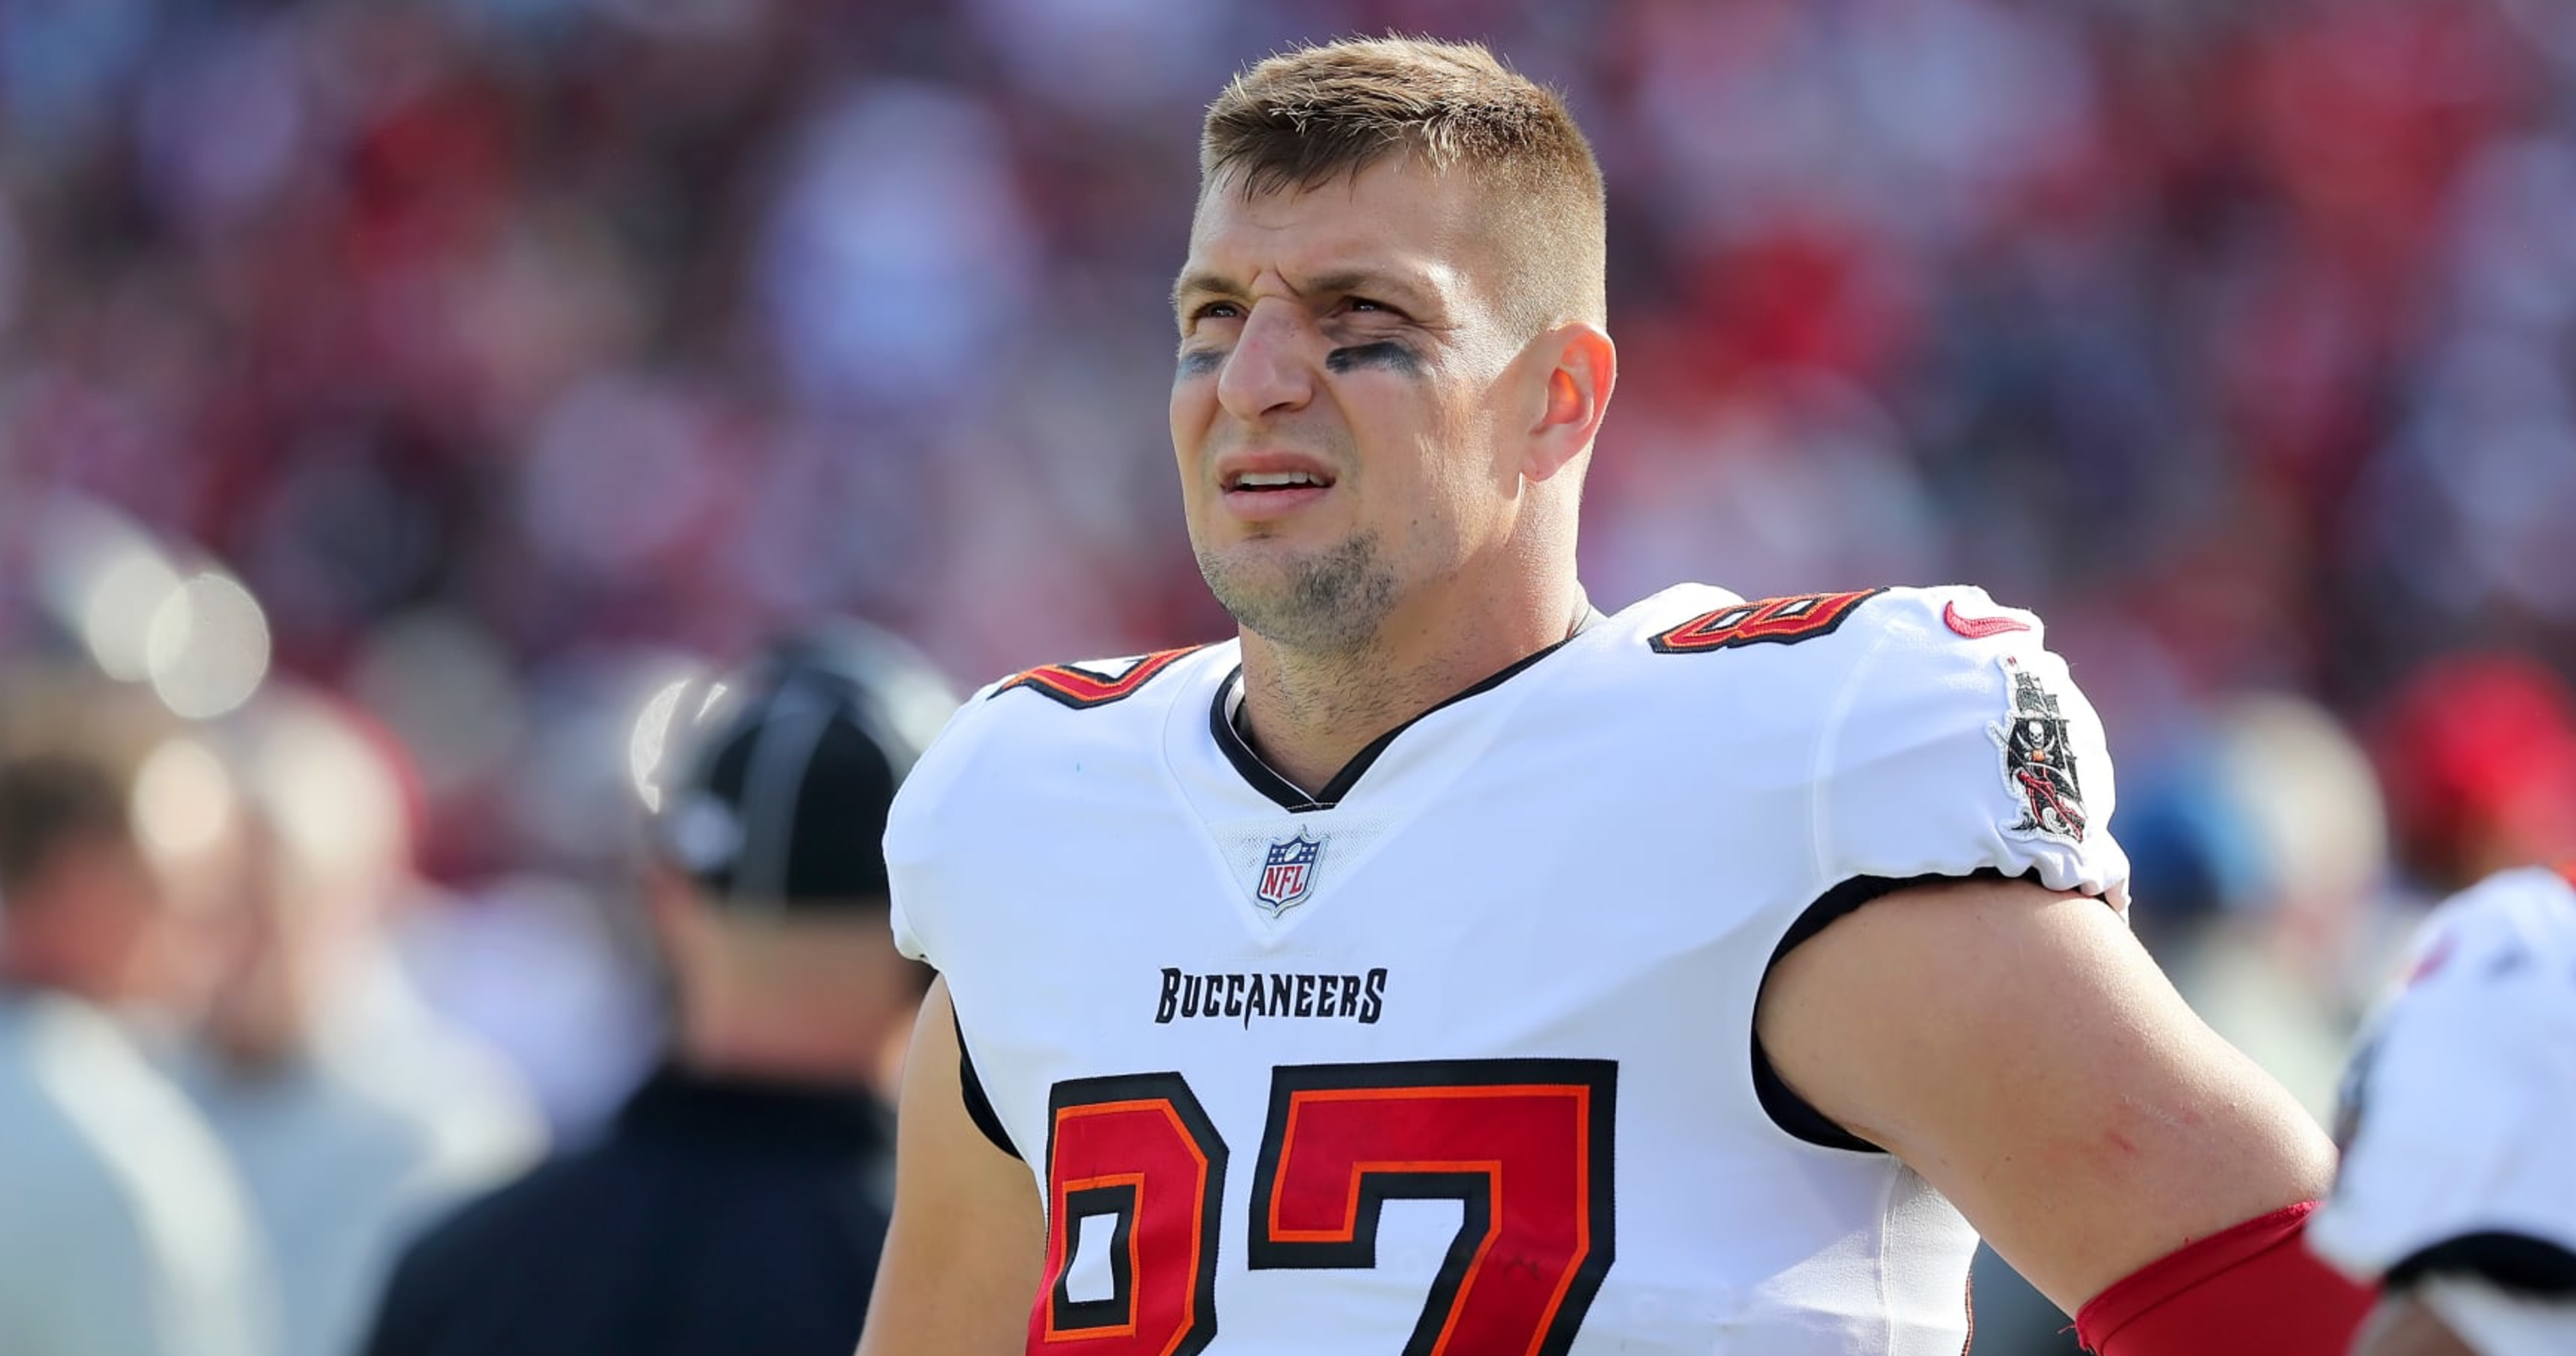 Rob Gronkowski Says 2 NFL Teams Reached Out After 'I'm Kinda Bored' Tweet